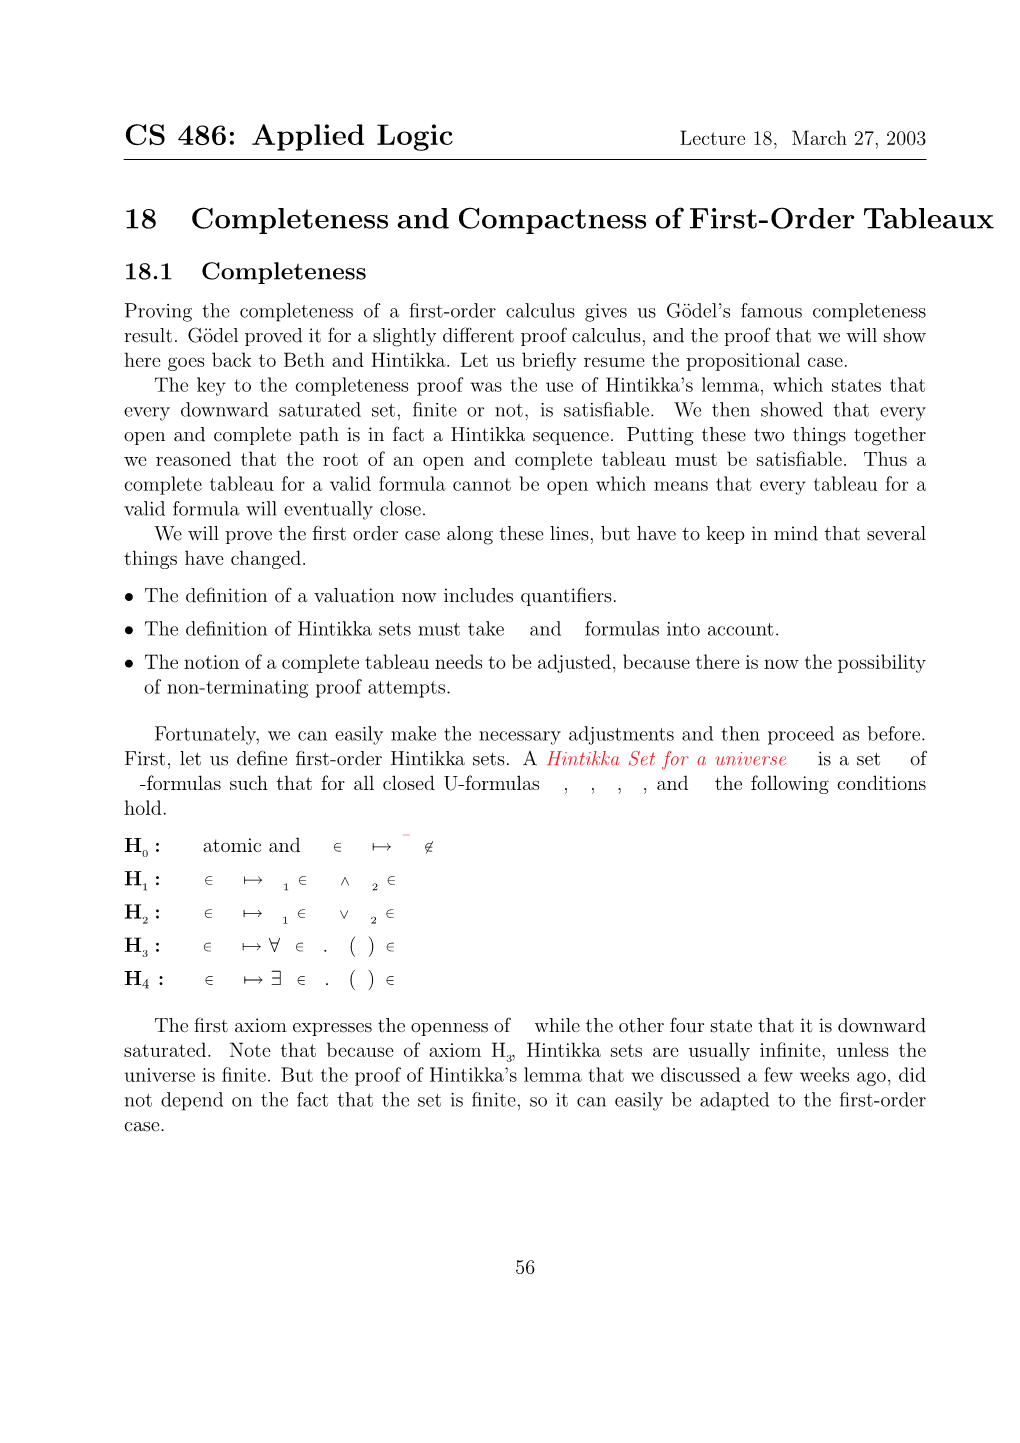 Completeness and Compactness of First-Order Tableaux